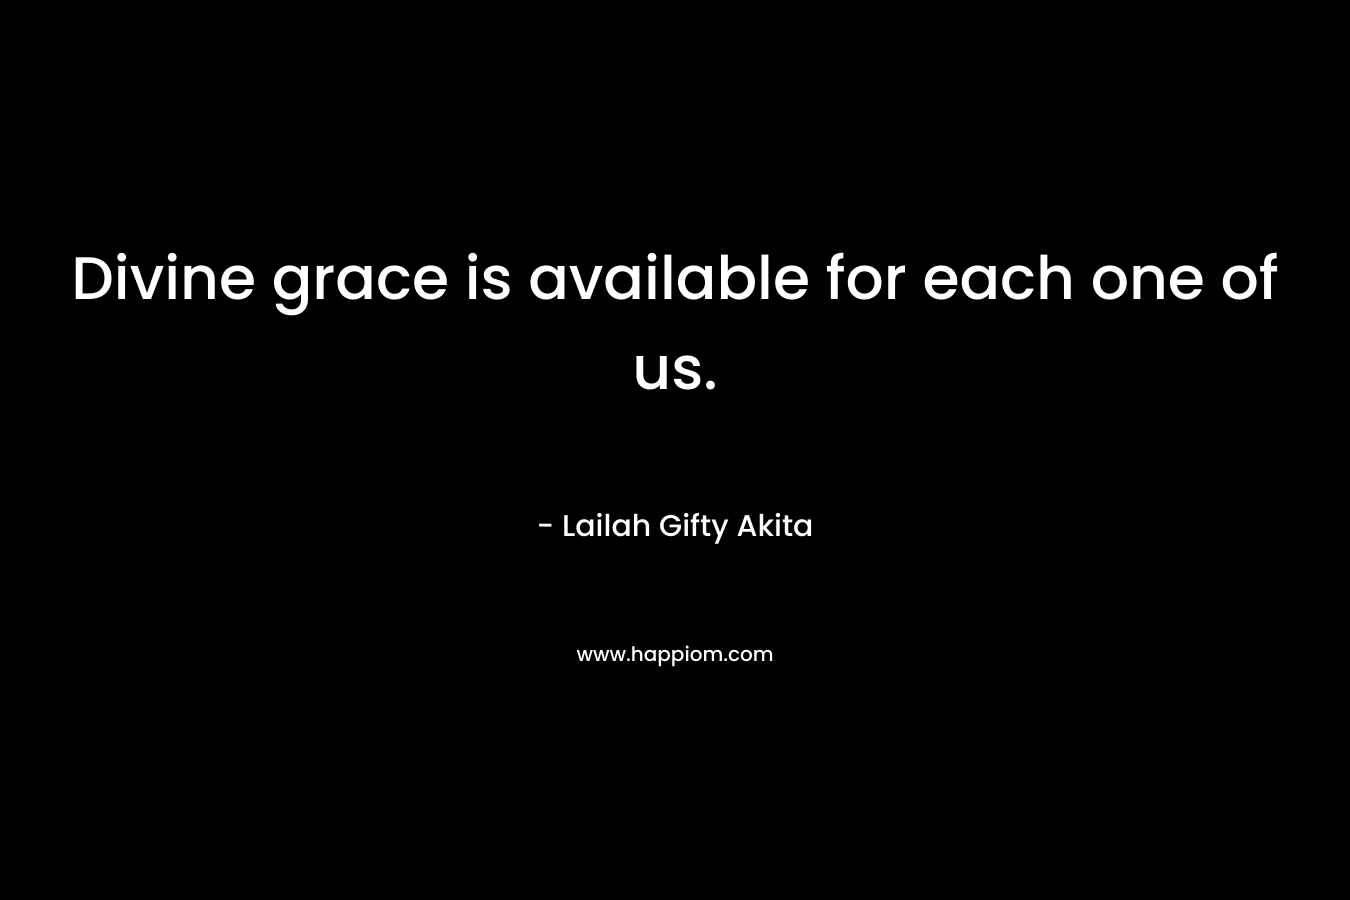 Divine grace is available for each one of us.